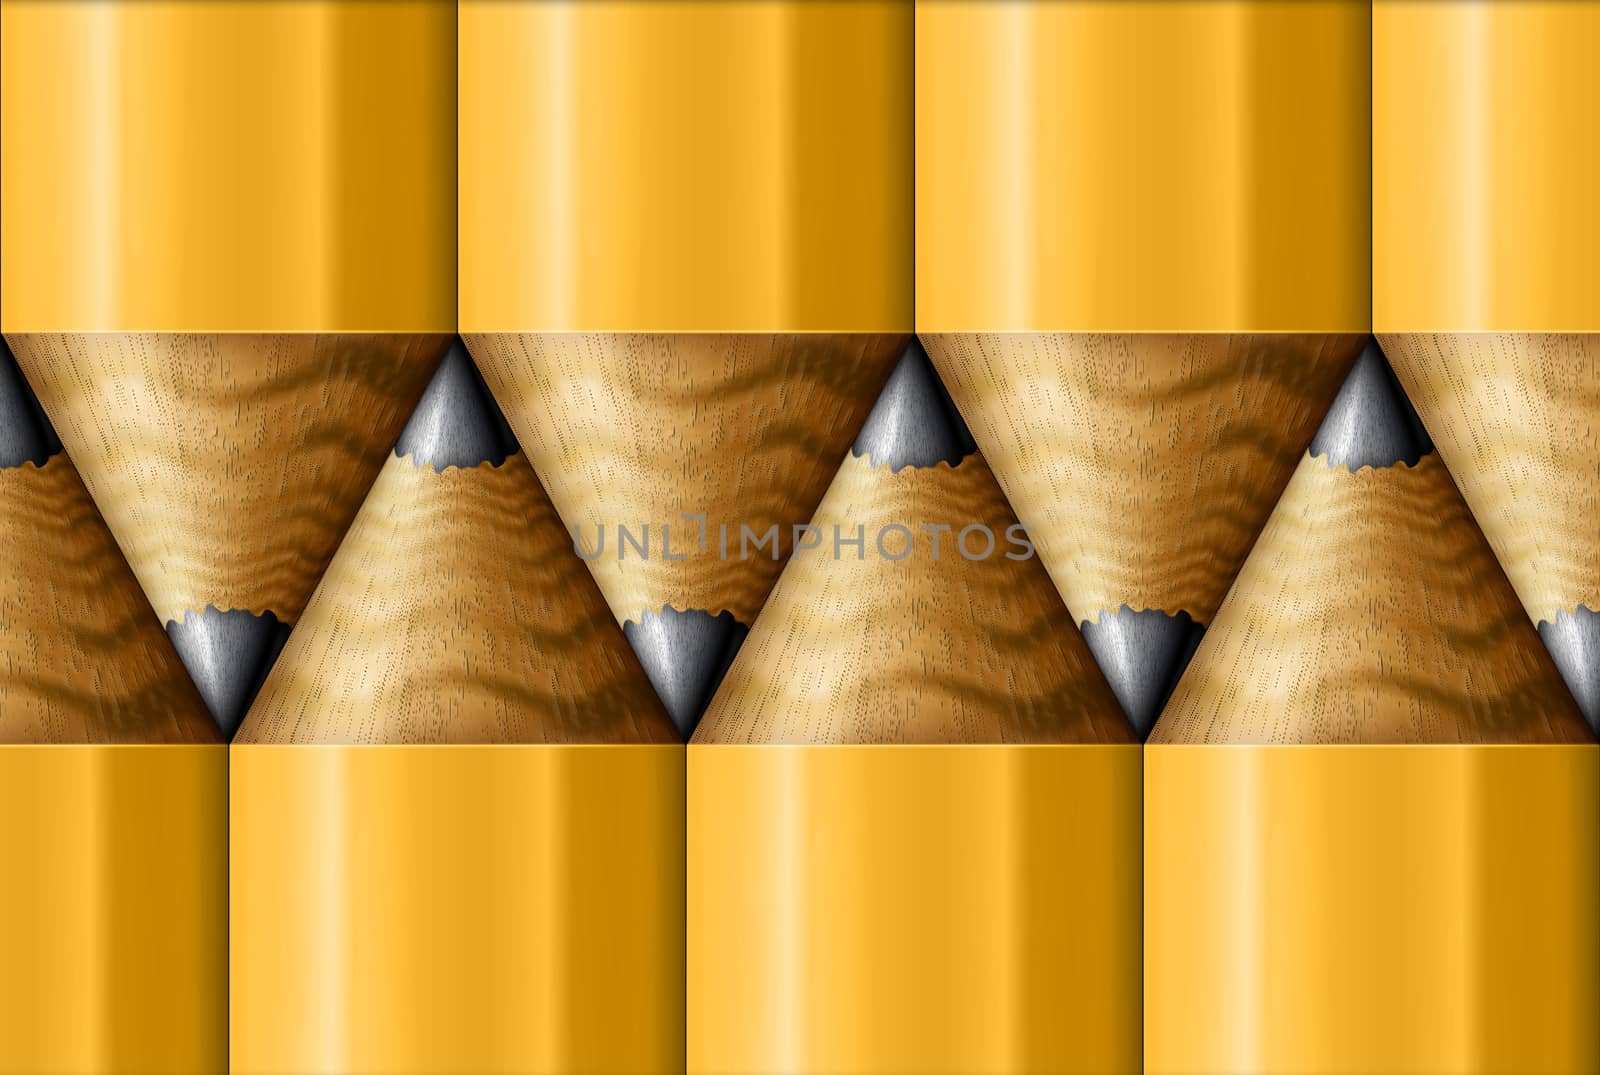 Illustration of pencils arranged in a pattern.